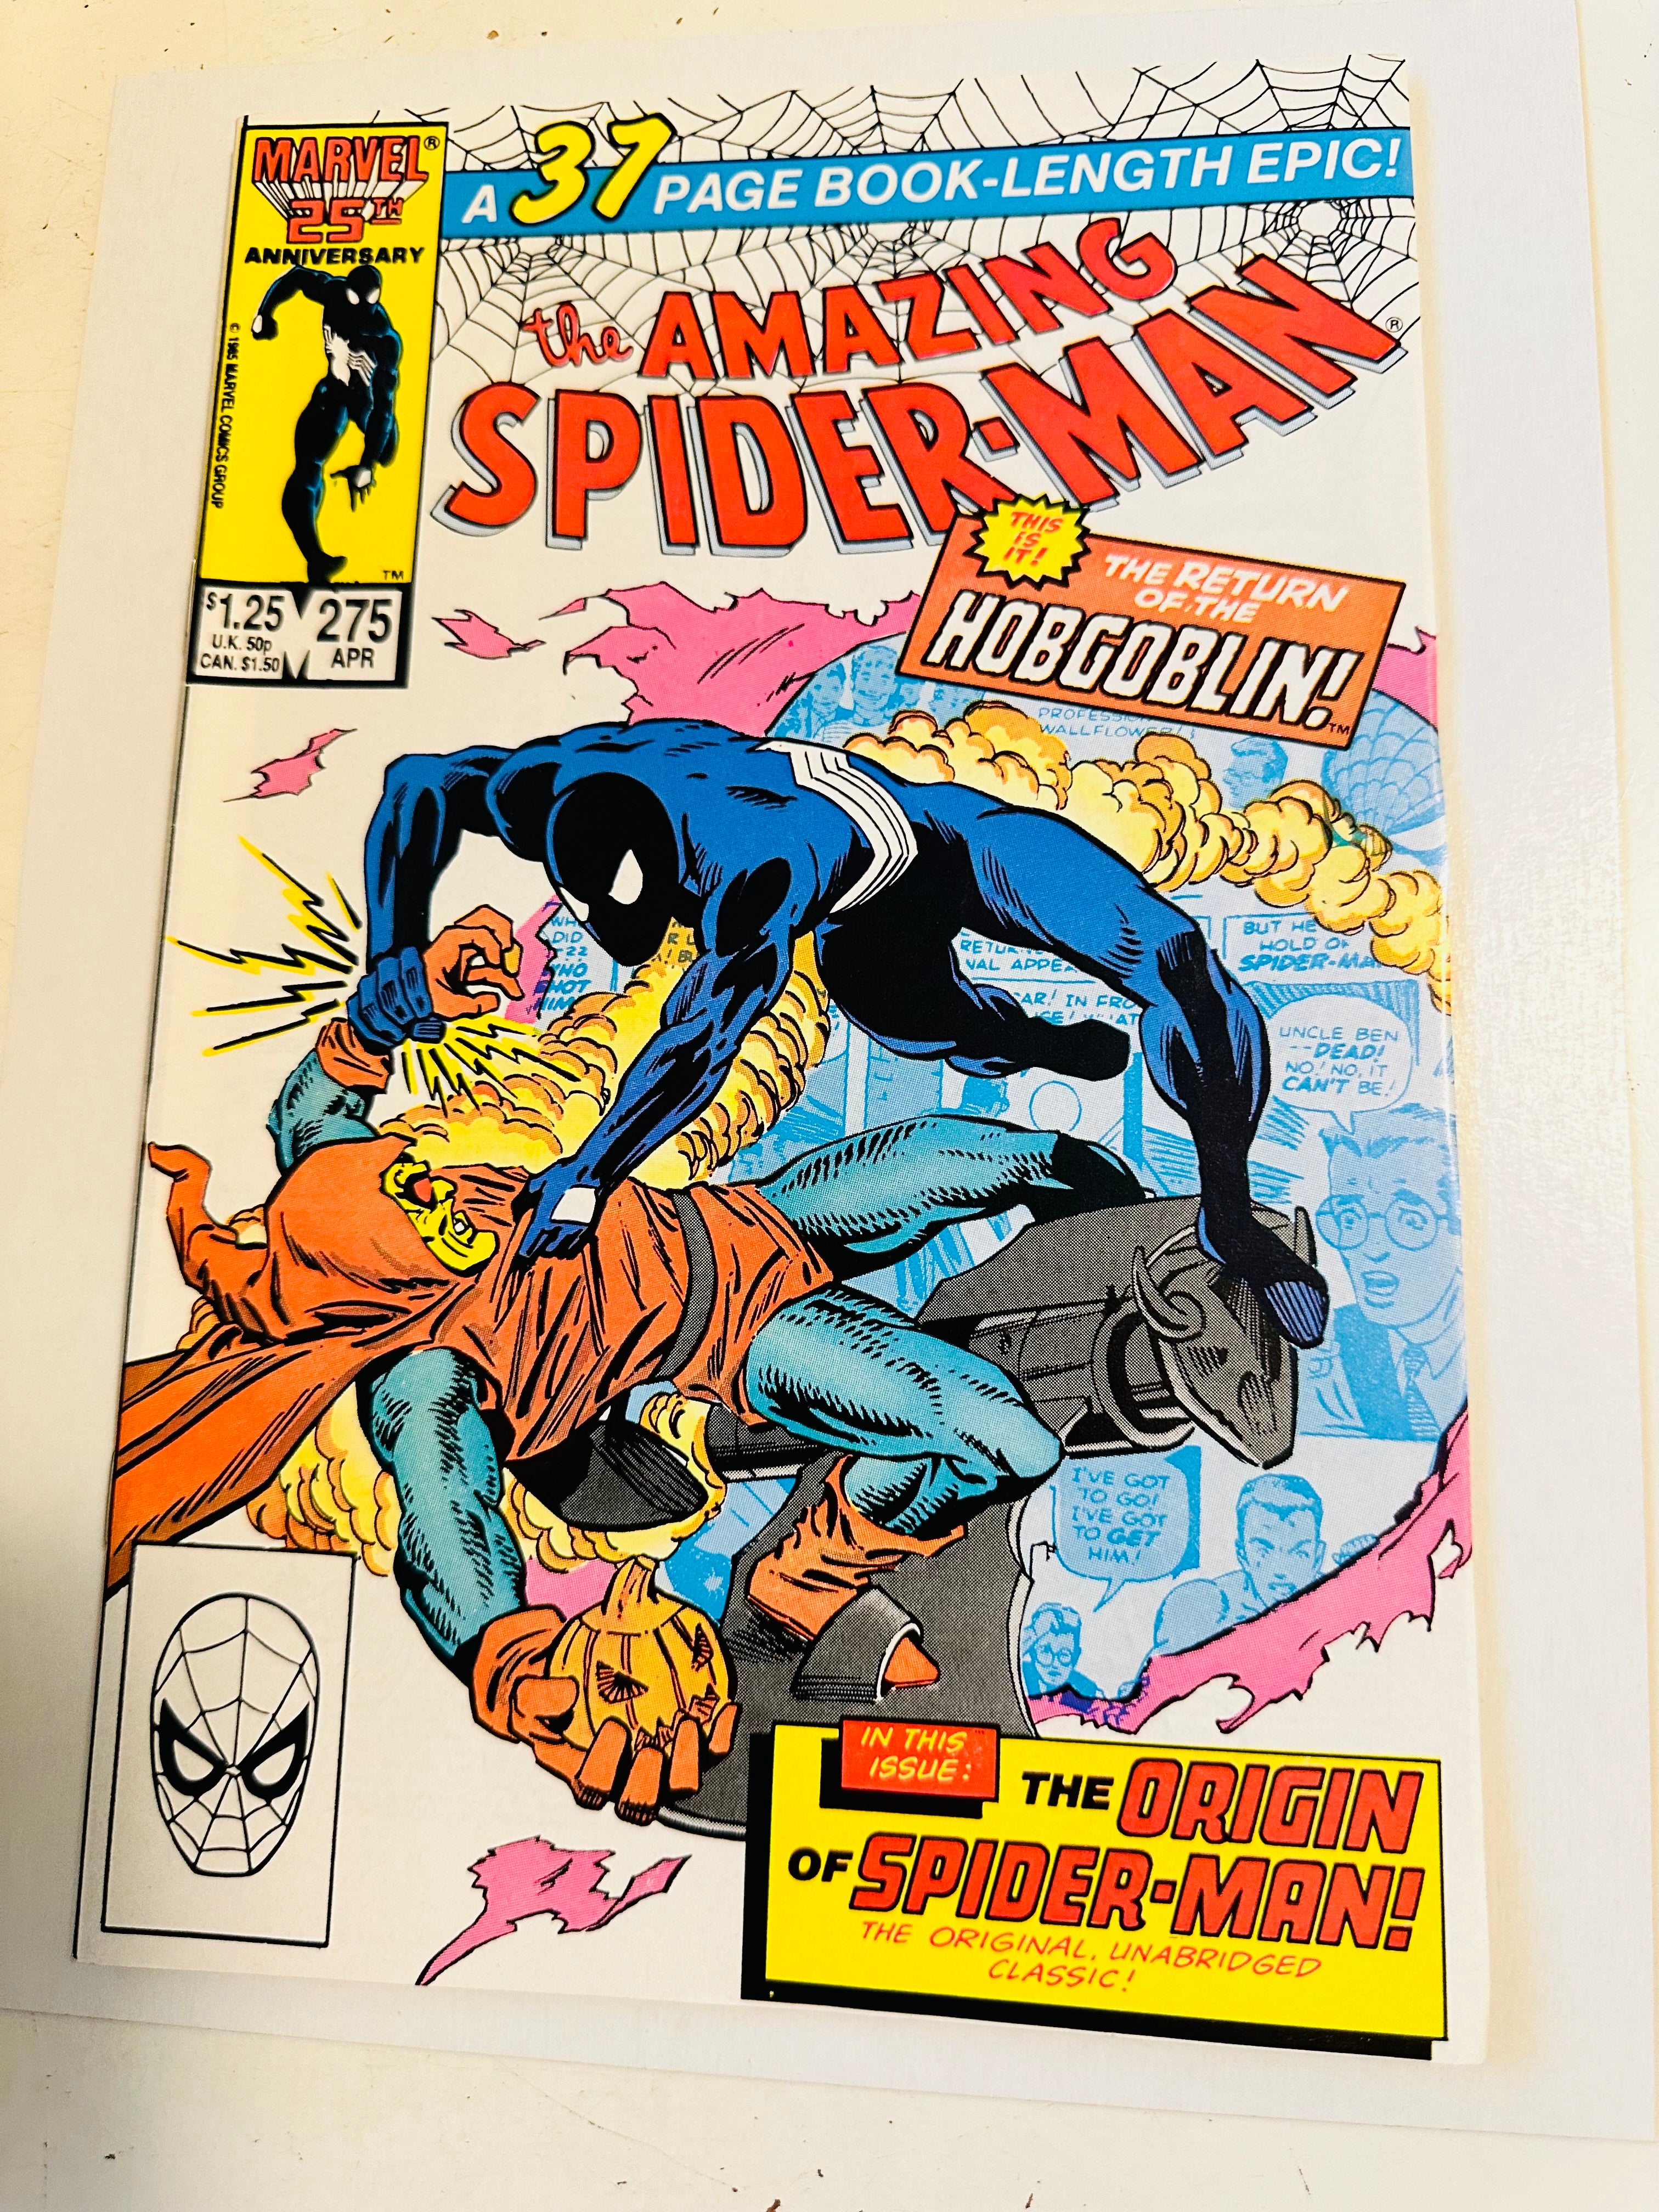 Amazing Spider-Man number 275 high-grade comic book